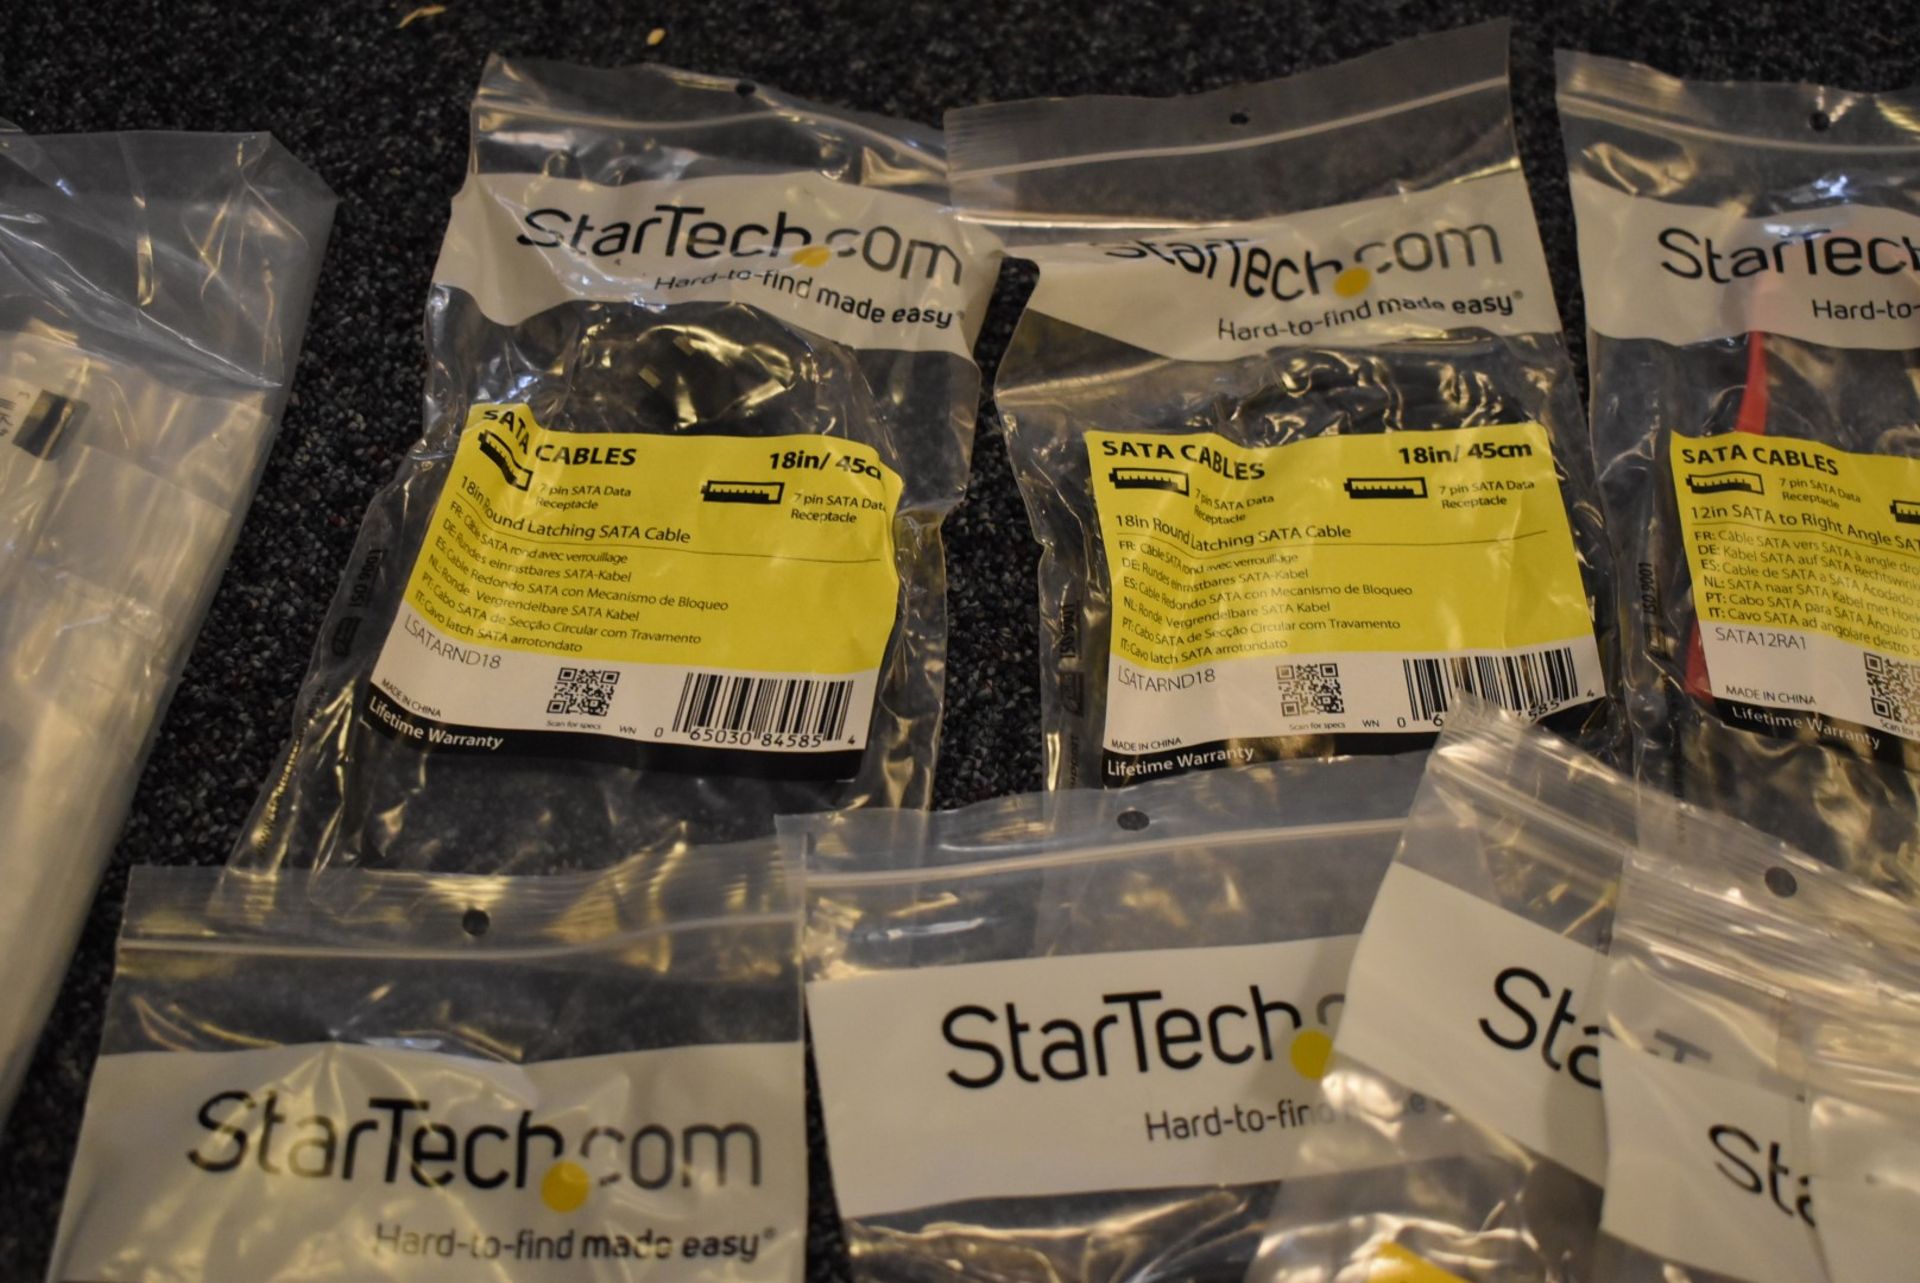 177 x Assorted StarTech Cables - Huge Lot in Original Packing - Various Cables Included - Image 44 of 50